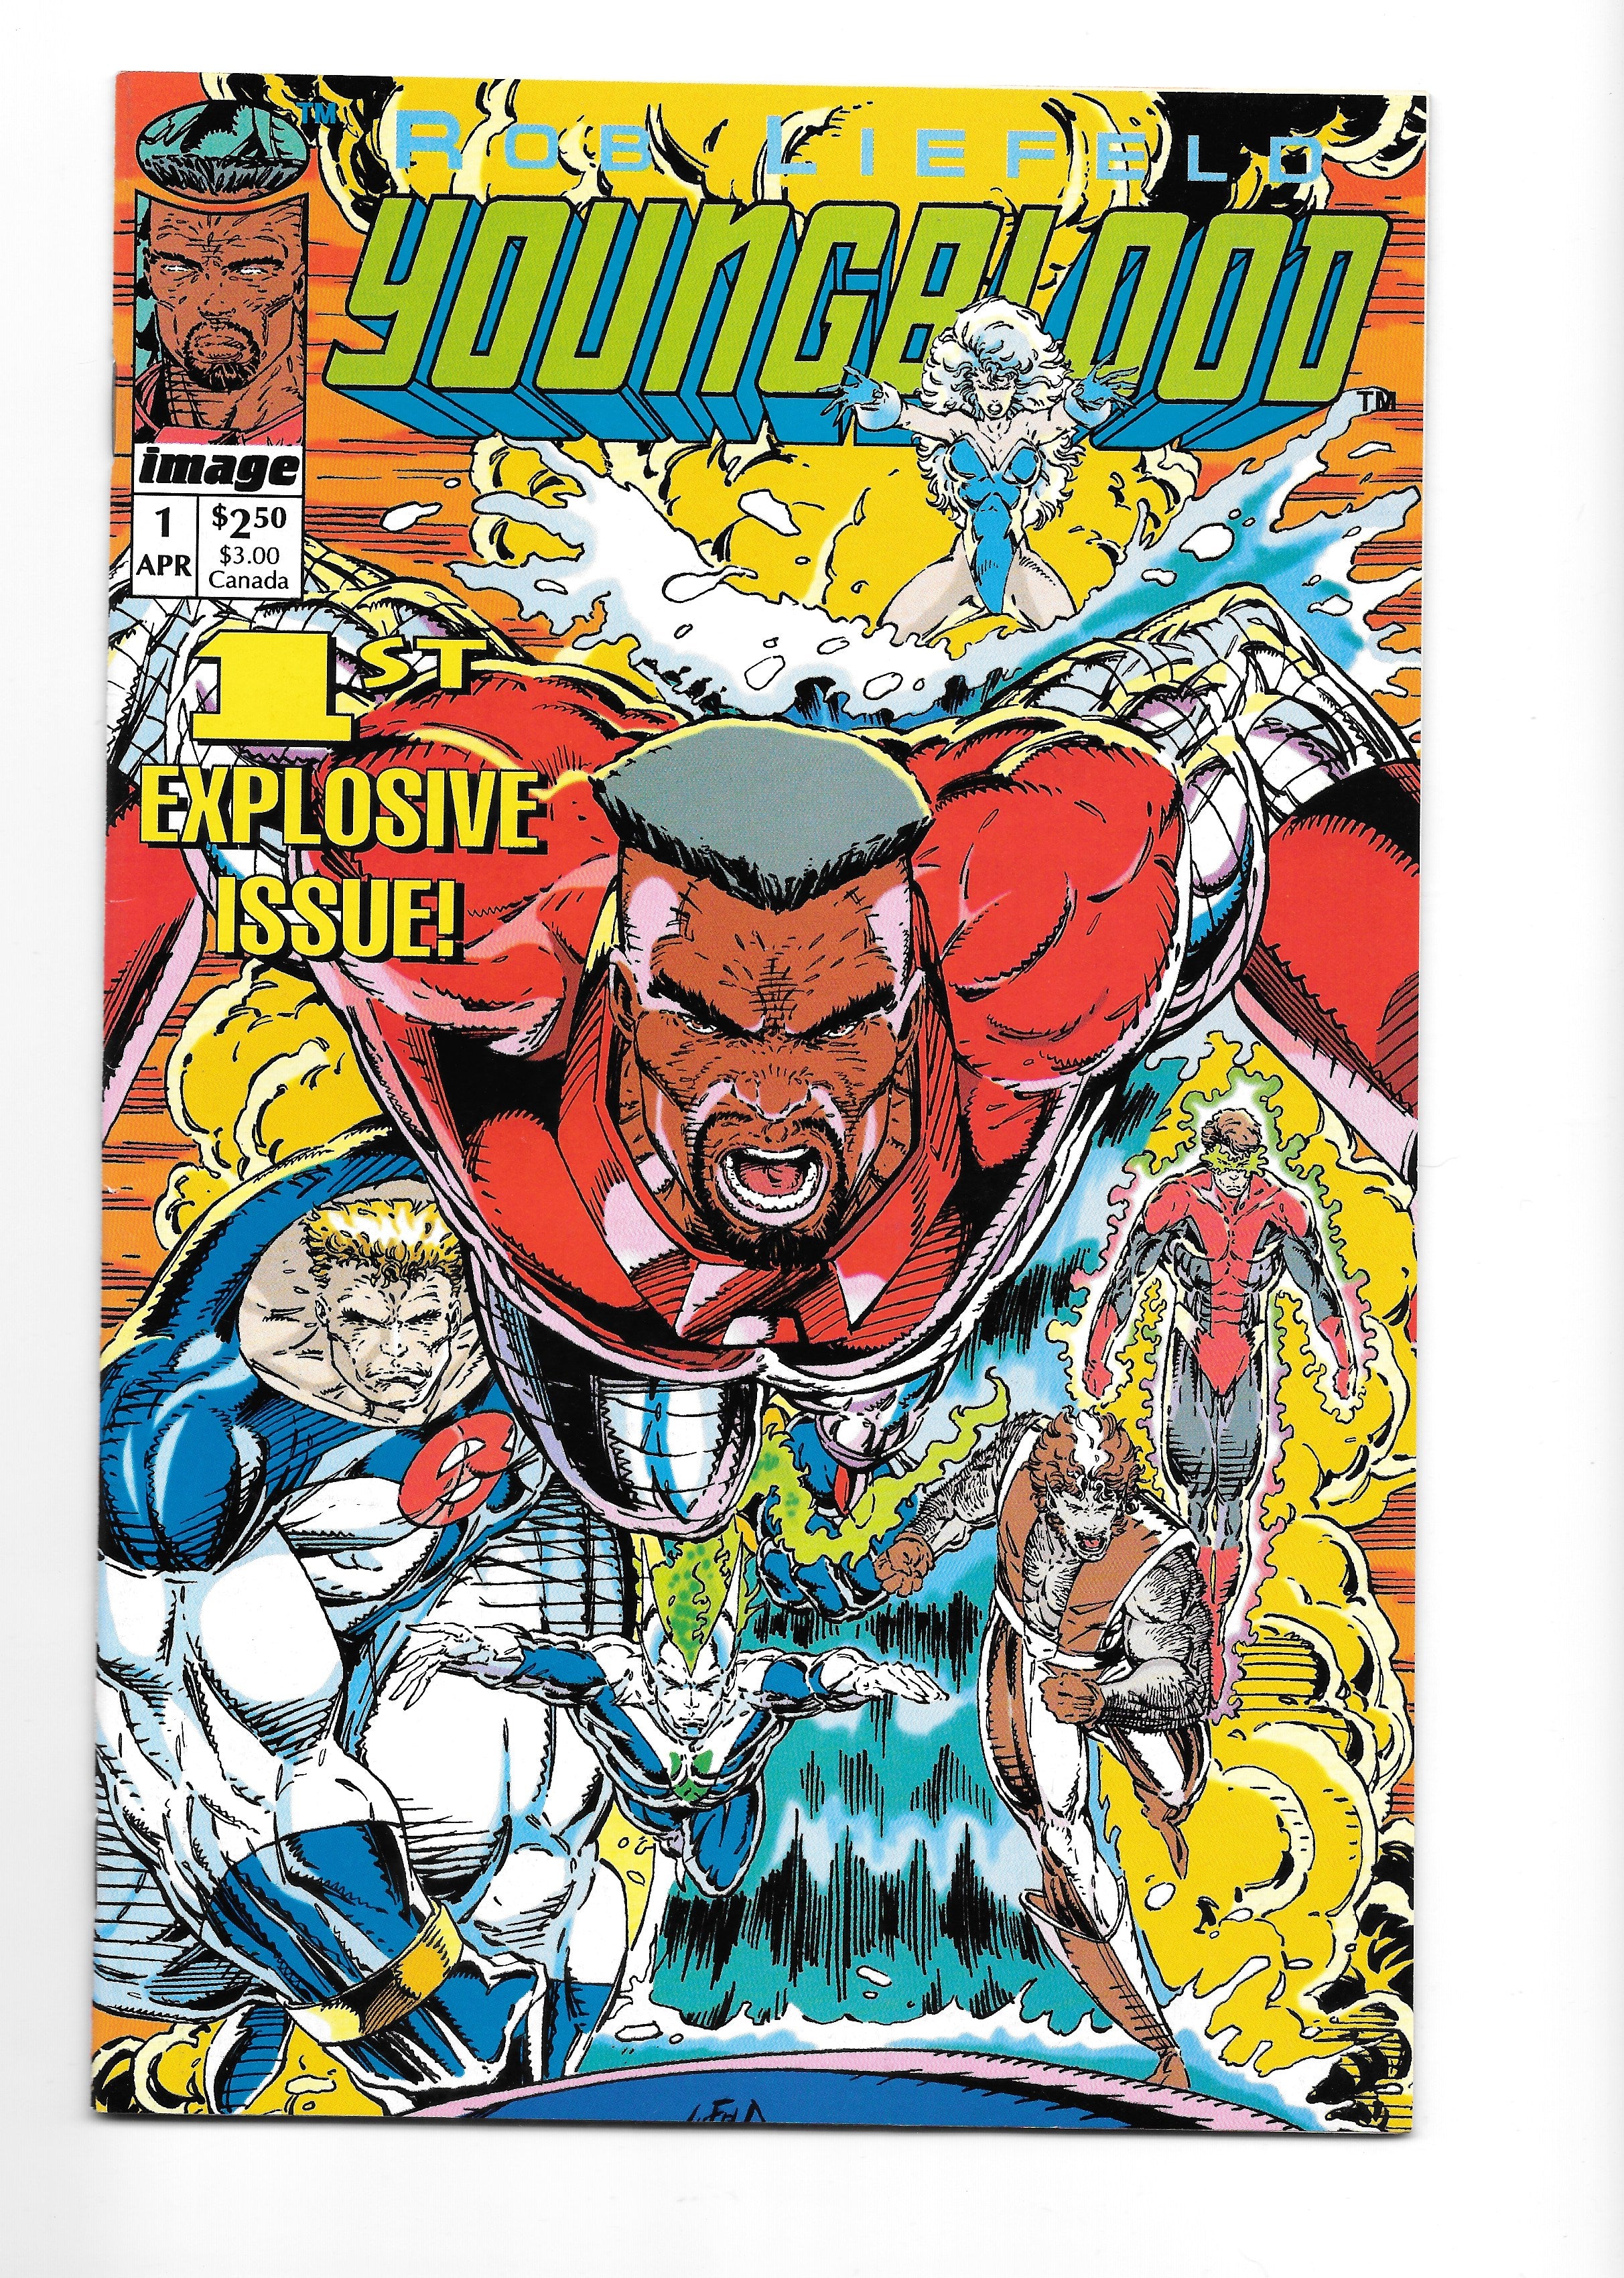 Photo of Youngblood, Vol. 1 (1992)  Iss 1A Very Fine/Near Mint  Comic sold by Stronghold Collectibles